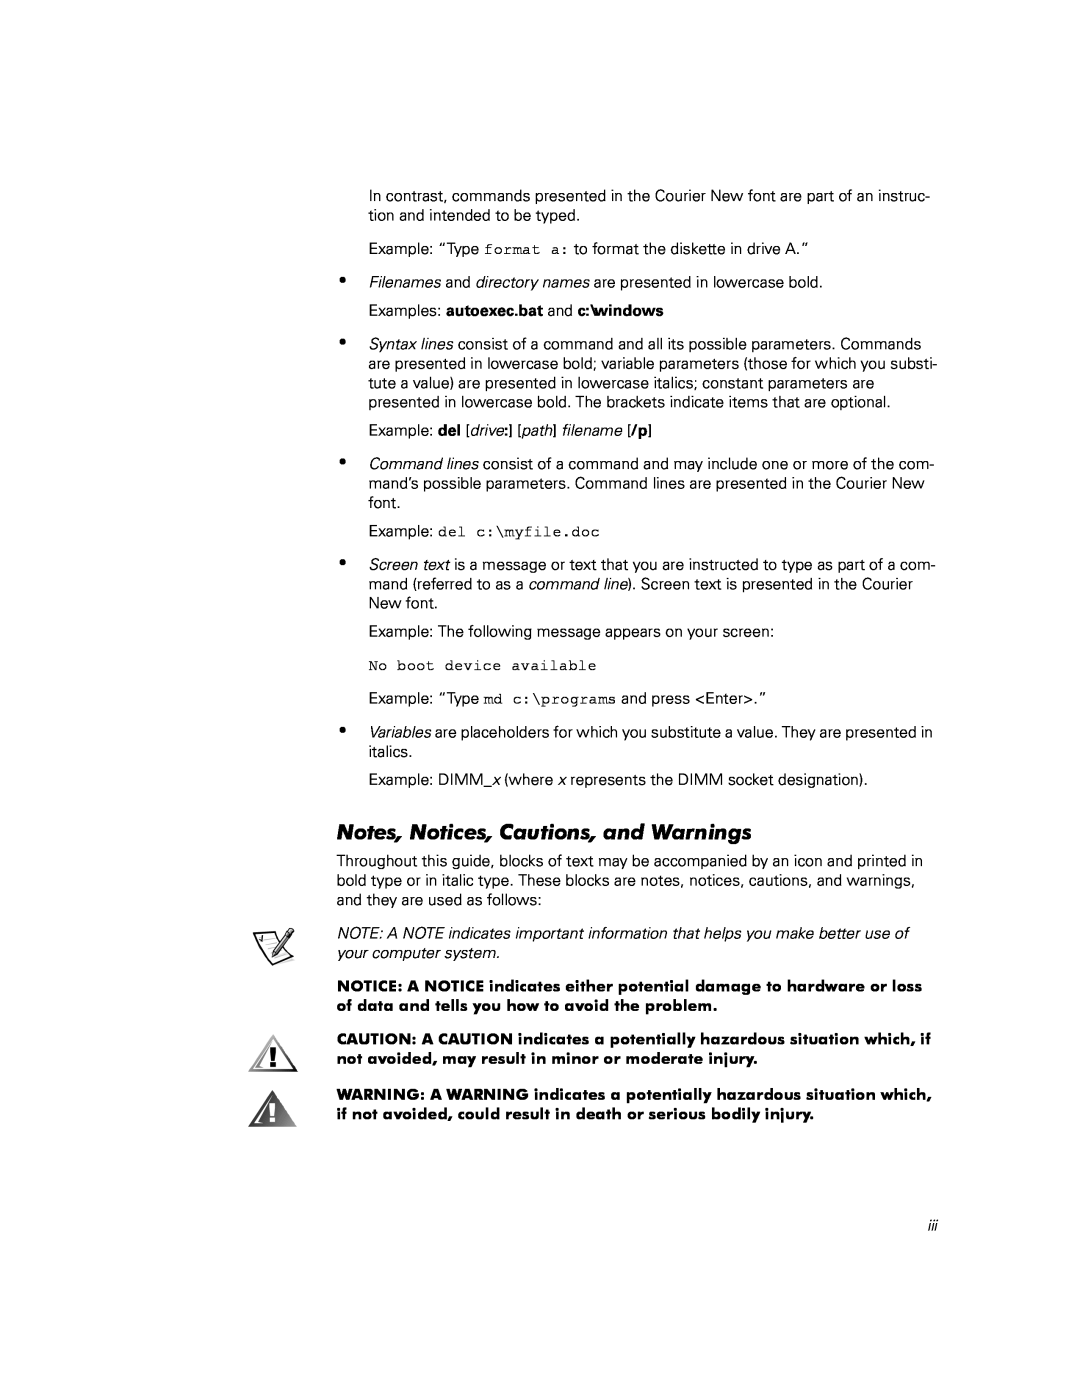 Dell 120 warranty Notes, Notices, Cautions, and Warnings, Example del drive path filename /p 